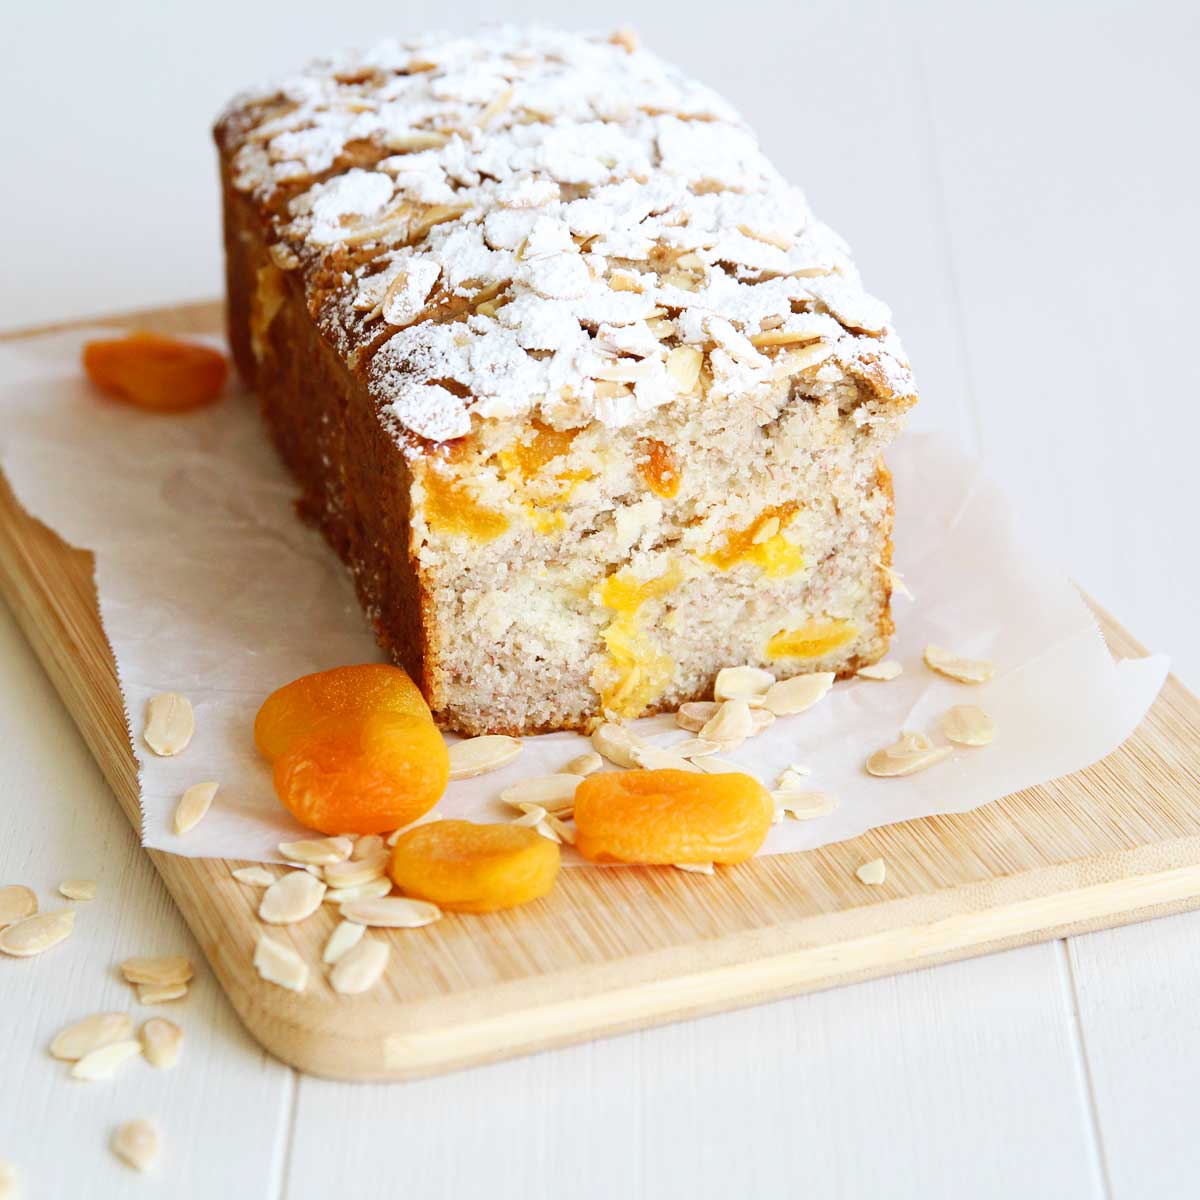 Simply Divine: Moist Vegan Almond Banana Bread with Apricots (Eggless, Dairy Free!) - Pumpkin Bread With Banana